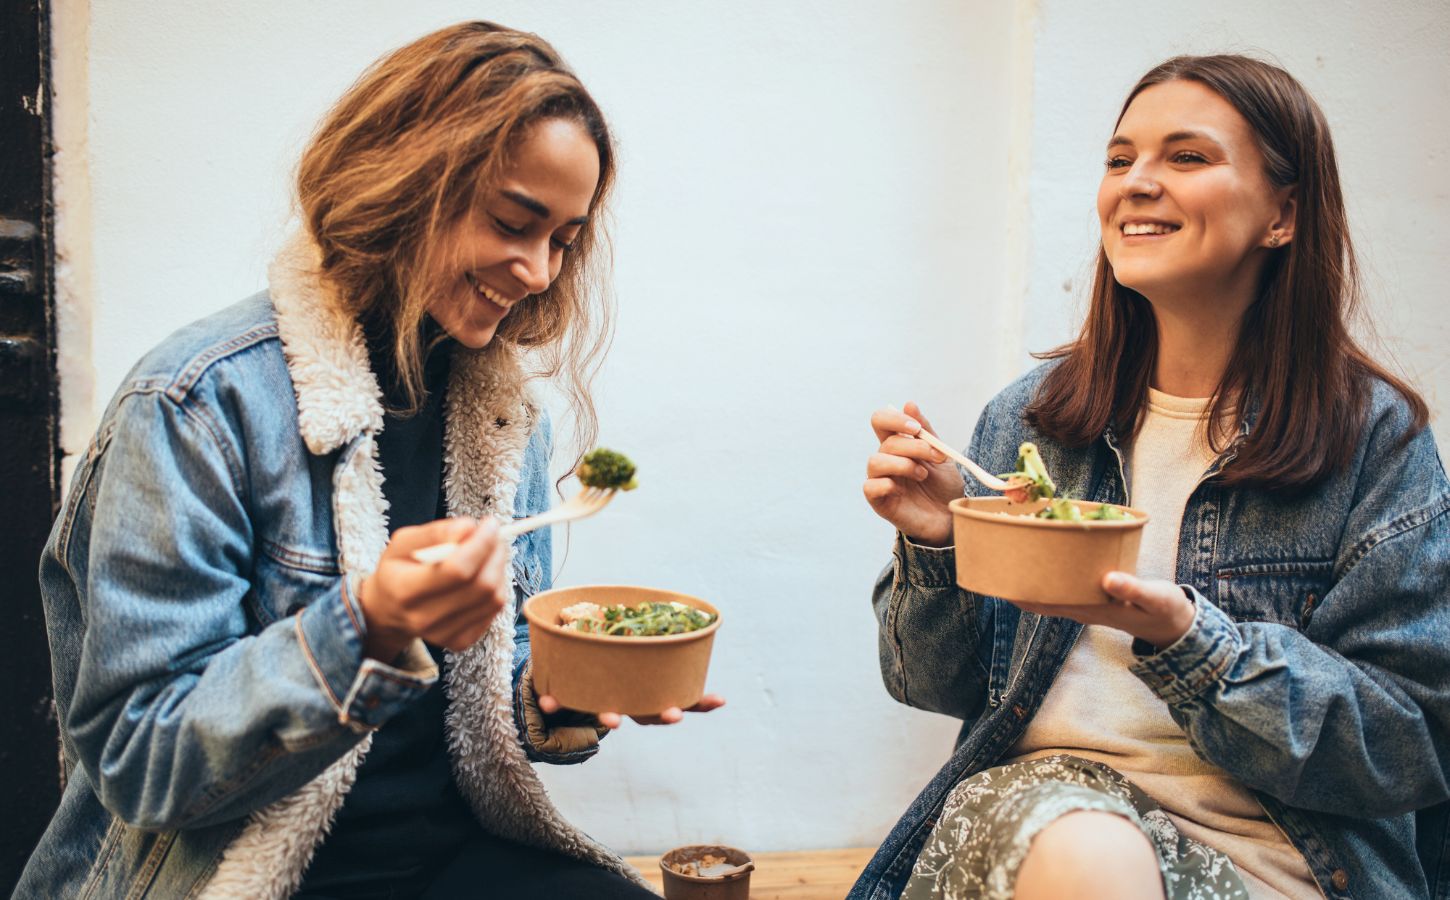 Two university students eating plant-based food together and talking